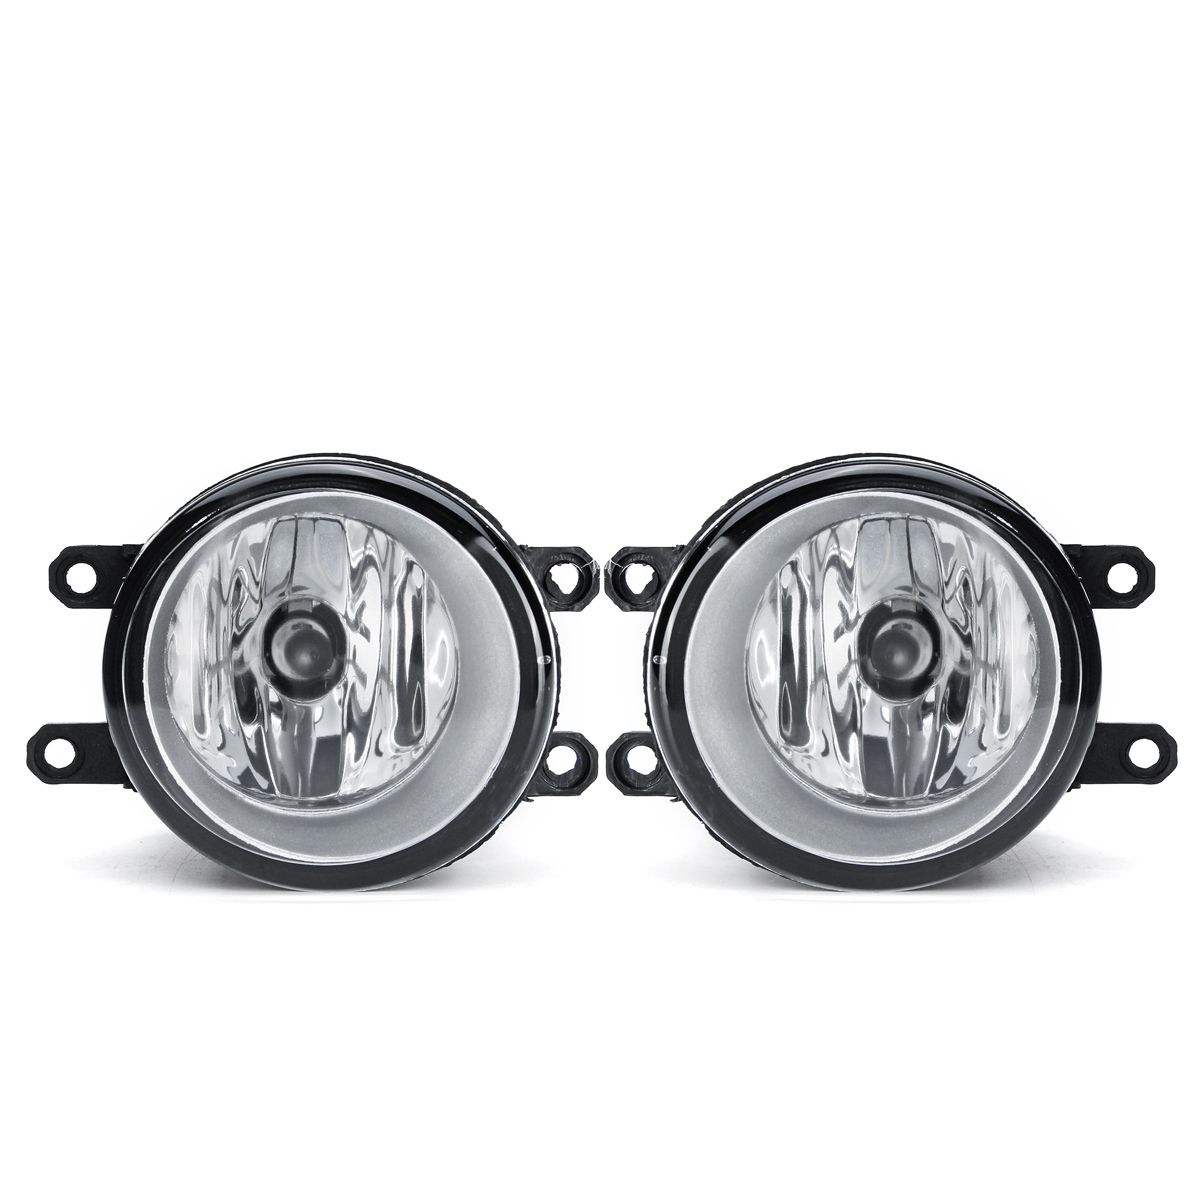 Car-Front-Bumper-Fog-Lights-Assembly-with-H11-Bulbs-Amber-Pair-for-Toyota-Corolla-2009-2010-1406101